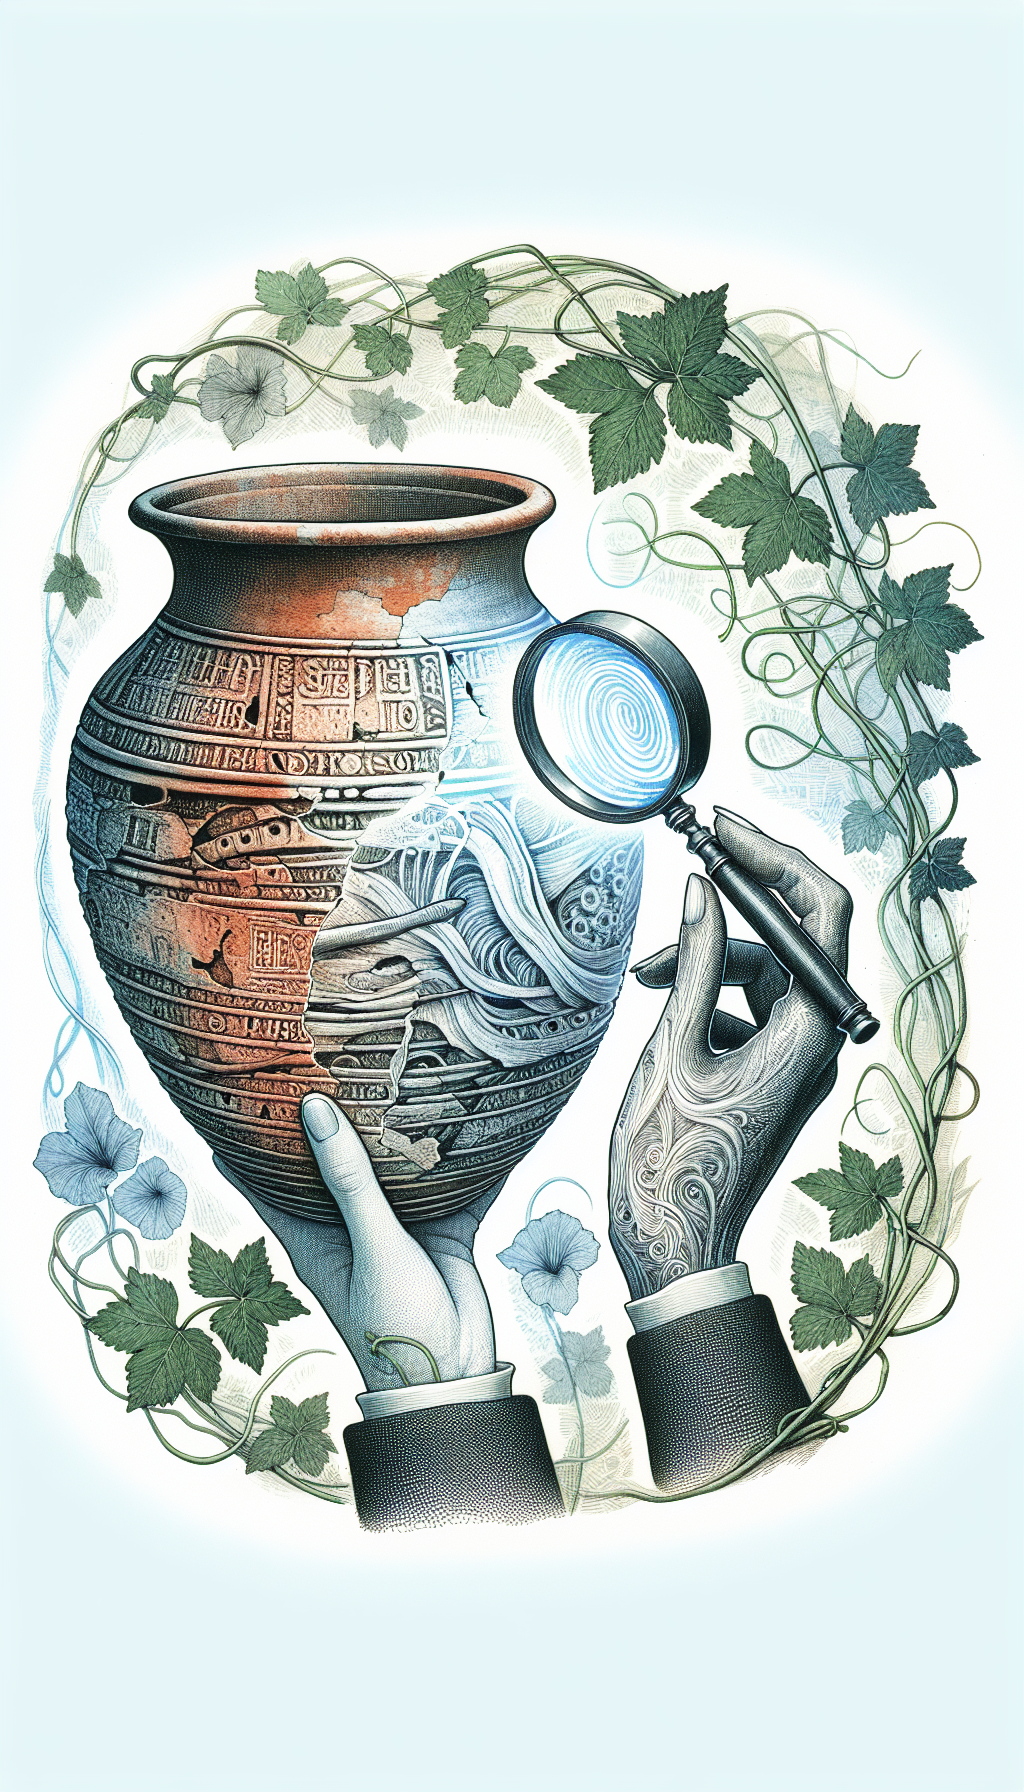 An illustration shows an ancient stoneware crock, semi-transparent, revealing layers of historical markings beneath its surface like stratified earth. A magnifying glass, held by a spectral gardener's hand, focuses on the unique inscriptions while delicate vines and leaves entwine the crock. The image seamlessly merges vintage etching and vibrant watercolors, symbolizing the fusion of past craftsmanship with living conservation efforts.